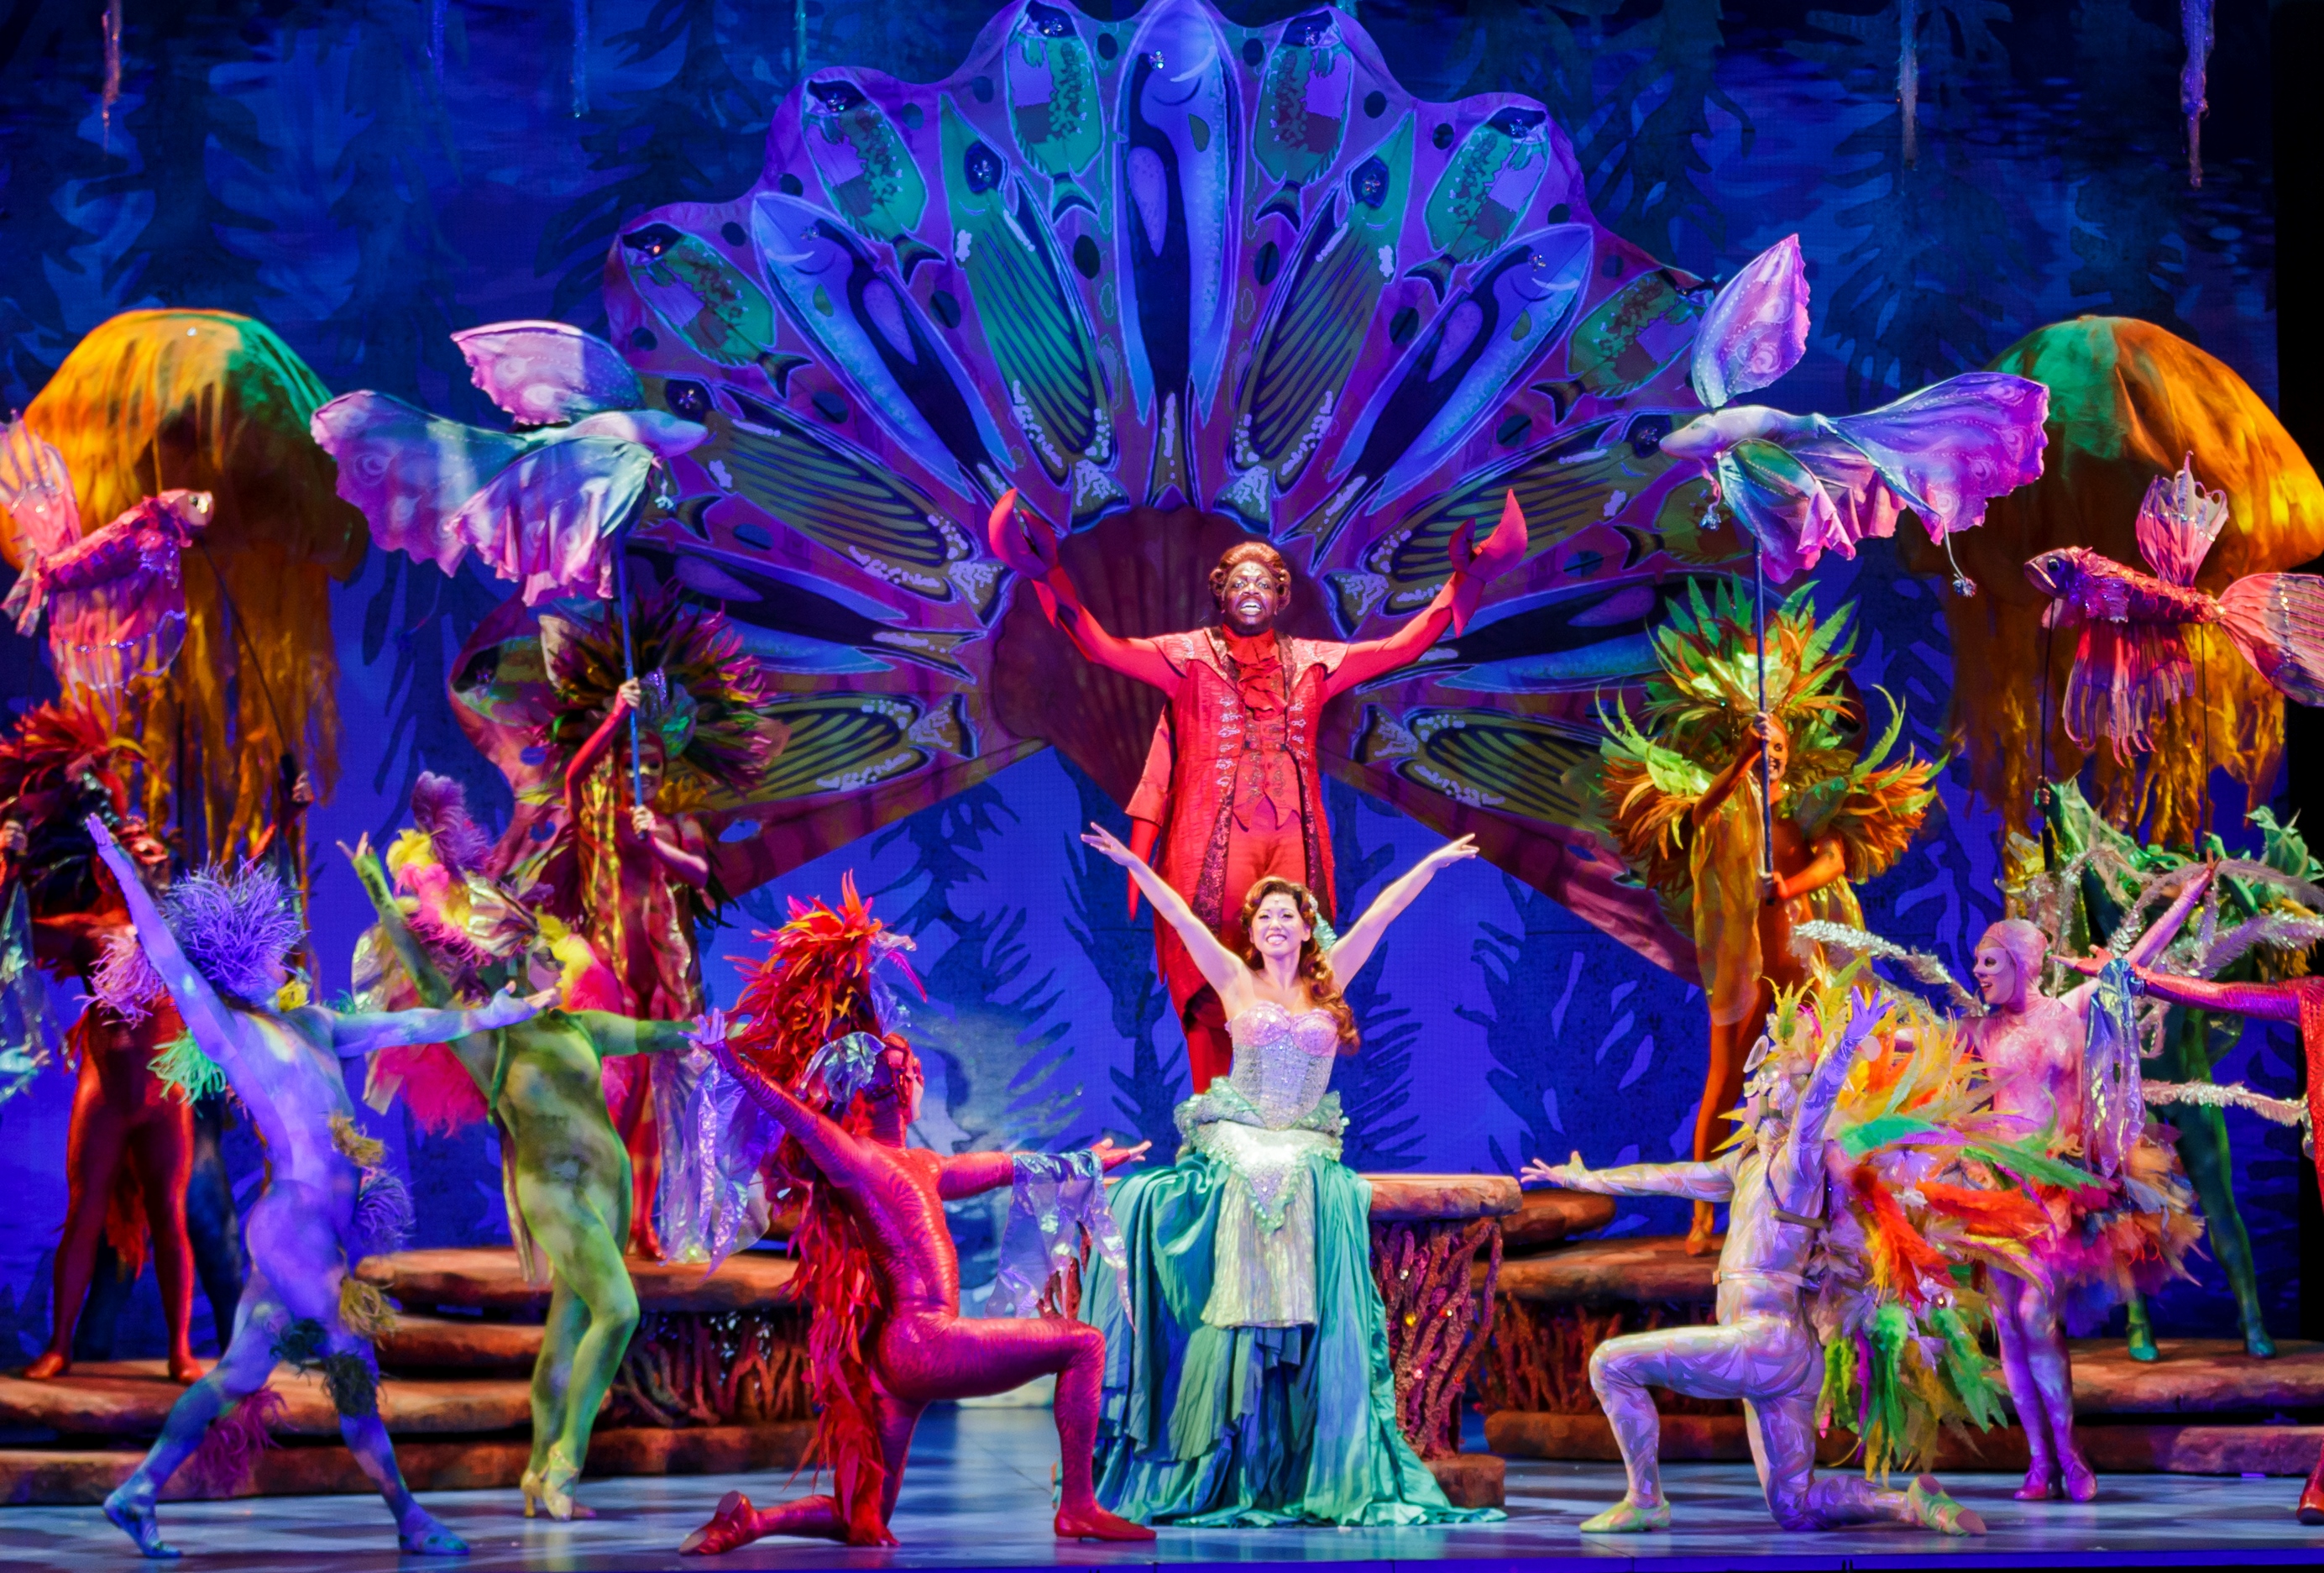 Sea You There! Disney's 'The Little Mermaid' Is a Fantastical Holiday Catch